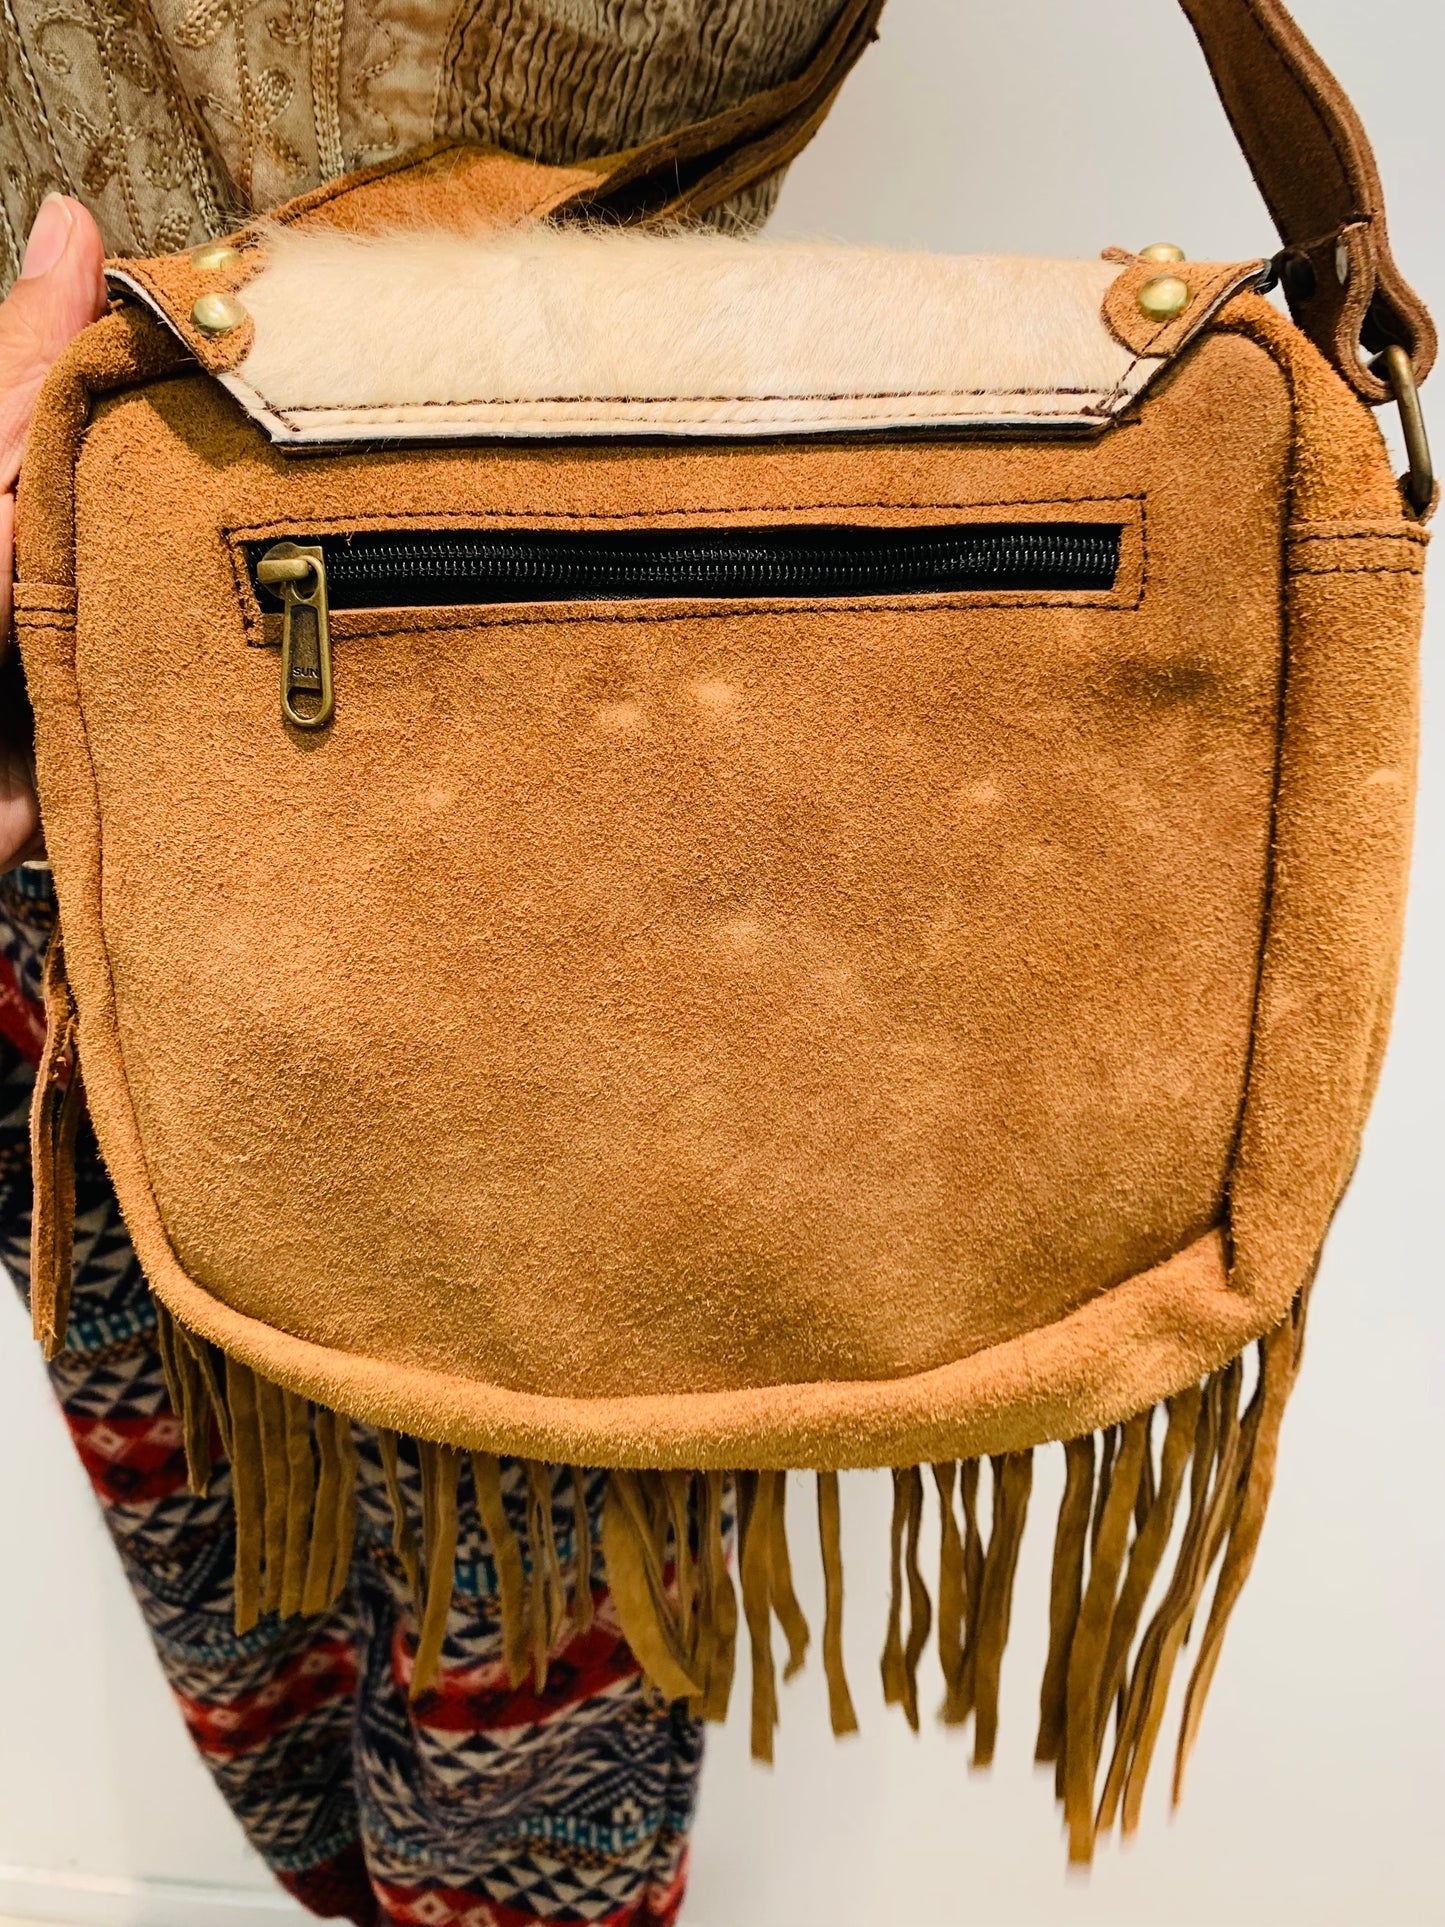 BOHEMIAN STATEMENT HANDCRAFTED GENUINE SUEDE LEATHER BAG #LEA1022